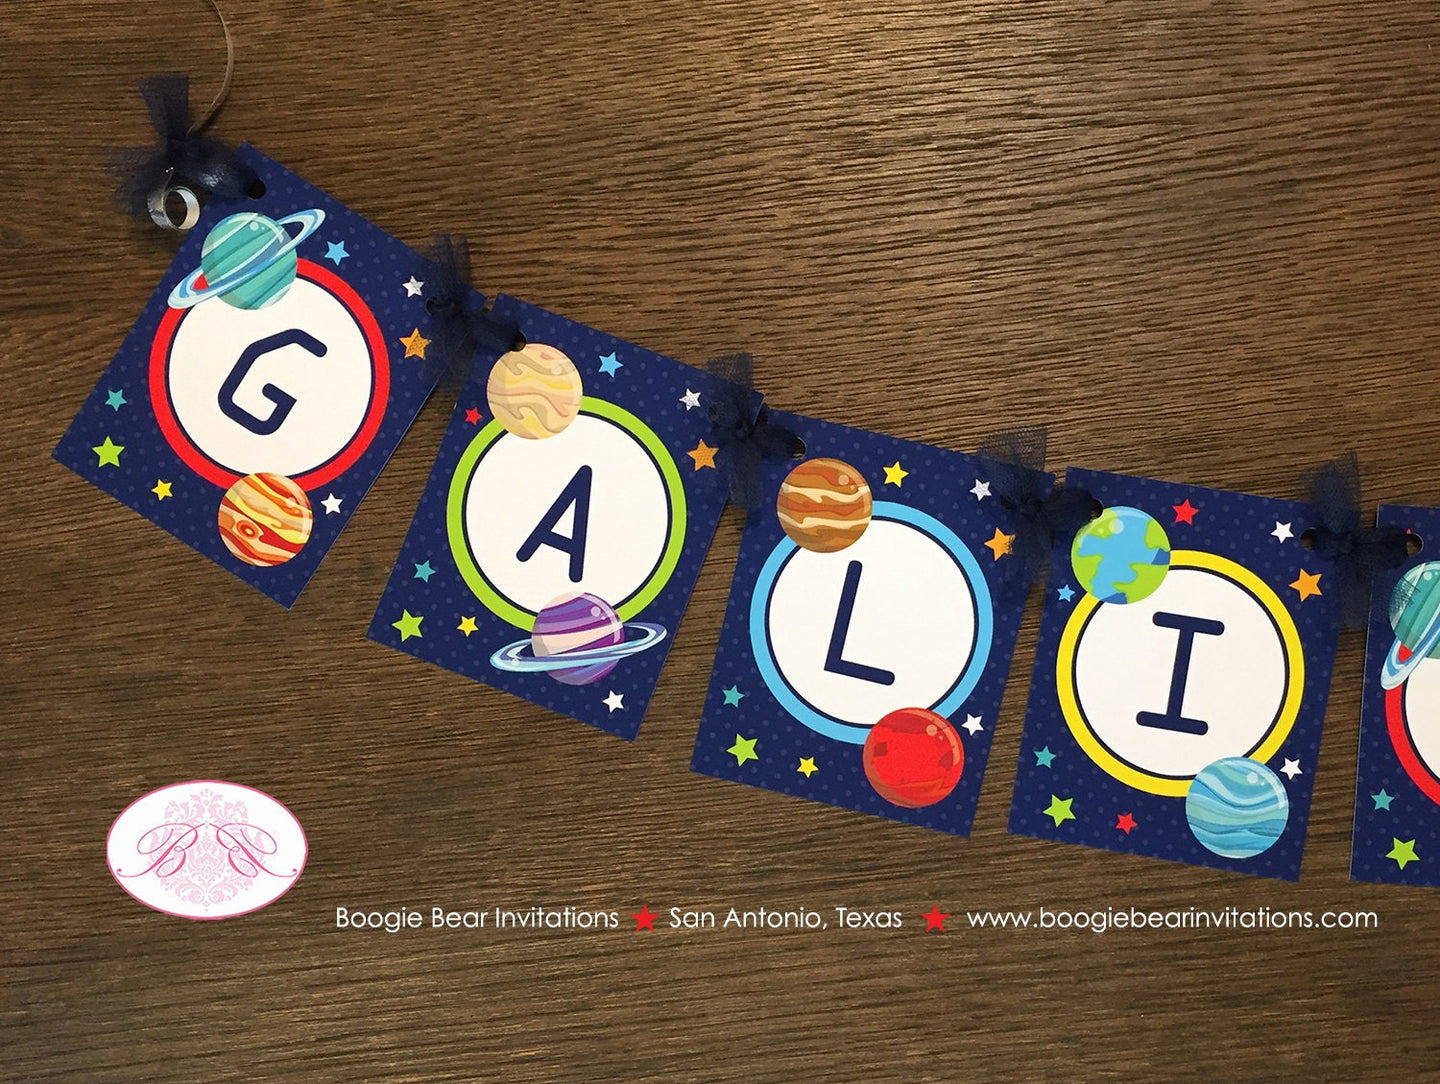 Outer Space Birthday Party Banner Small Boy Girl Science Planets Solar System Galaxy Orbit Stars Moon Boogie Bear Invitations Galileo Theme